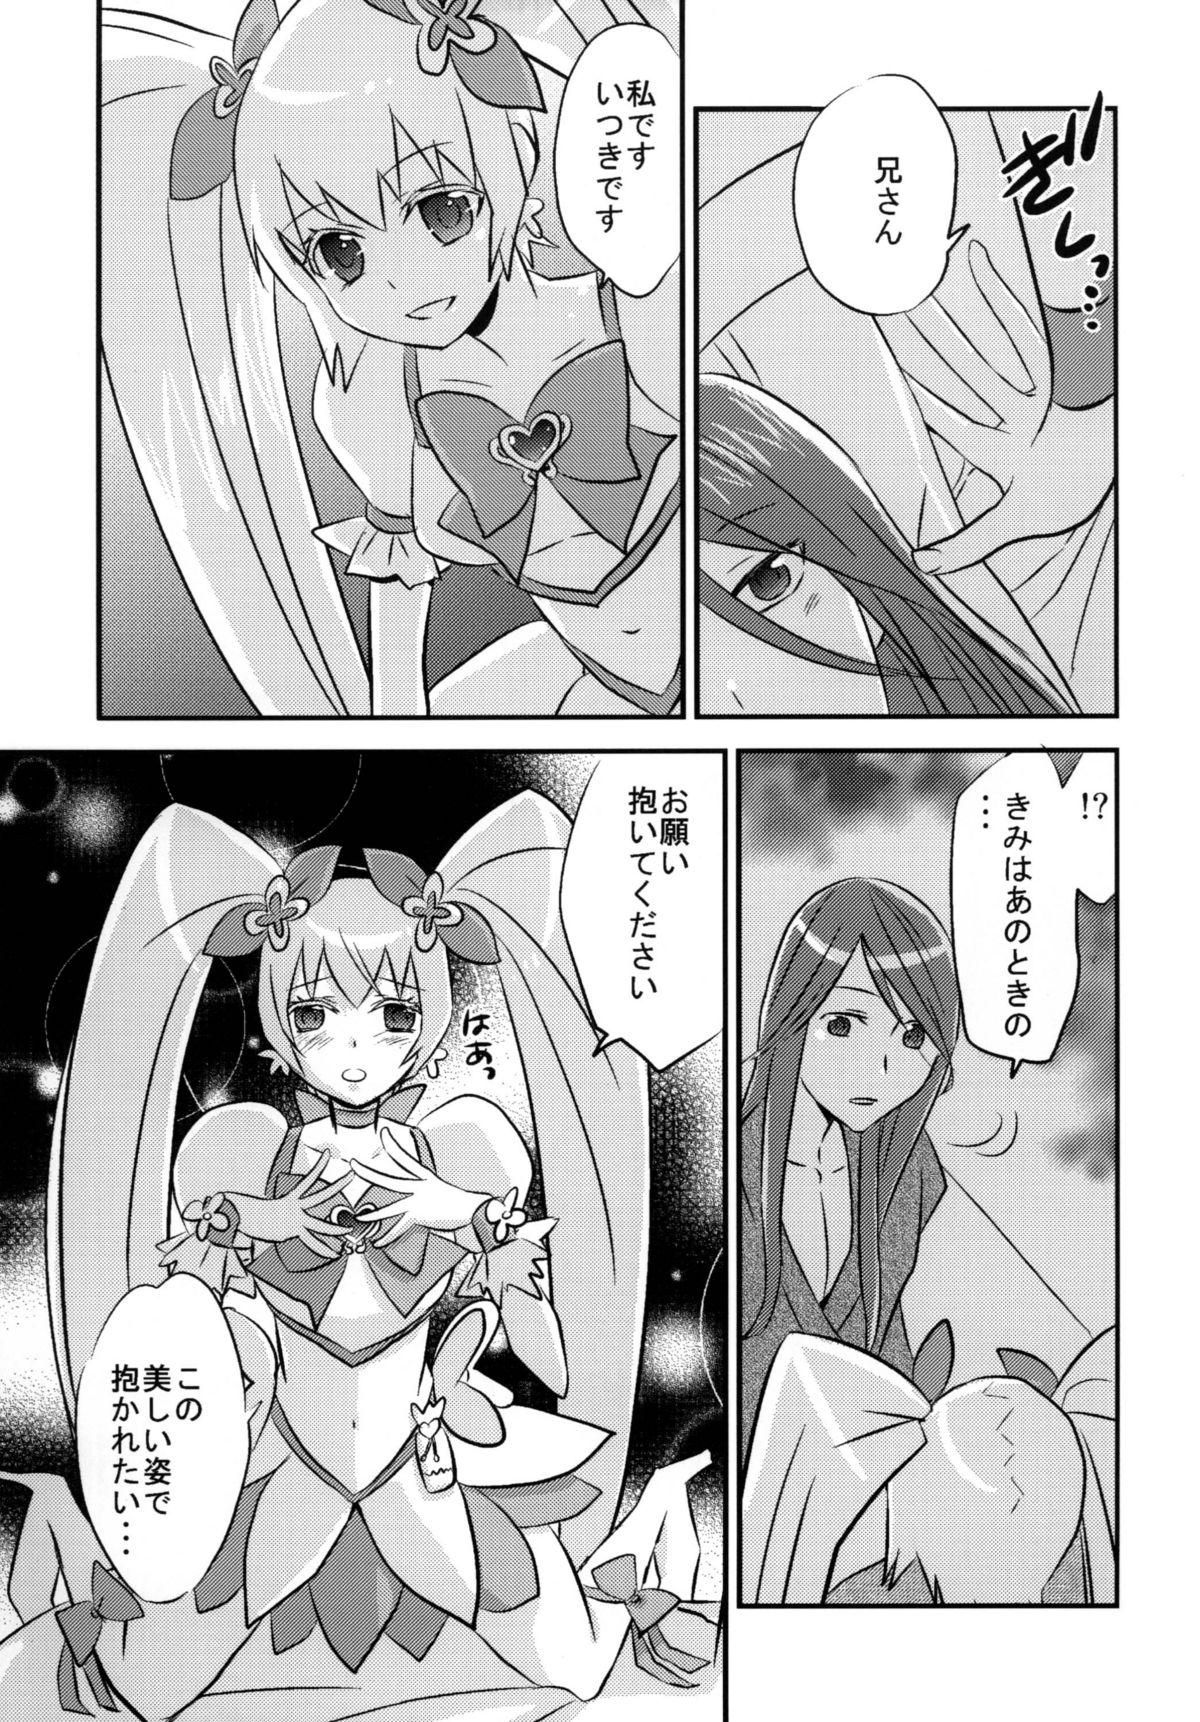 Clothed Munekyun Sunshine - Heartcatch precure Stockings - Page 8